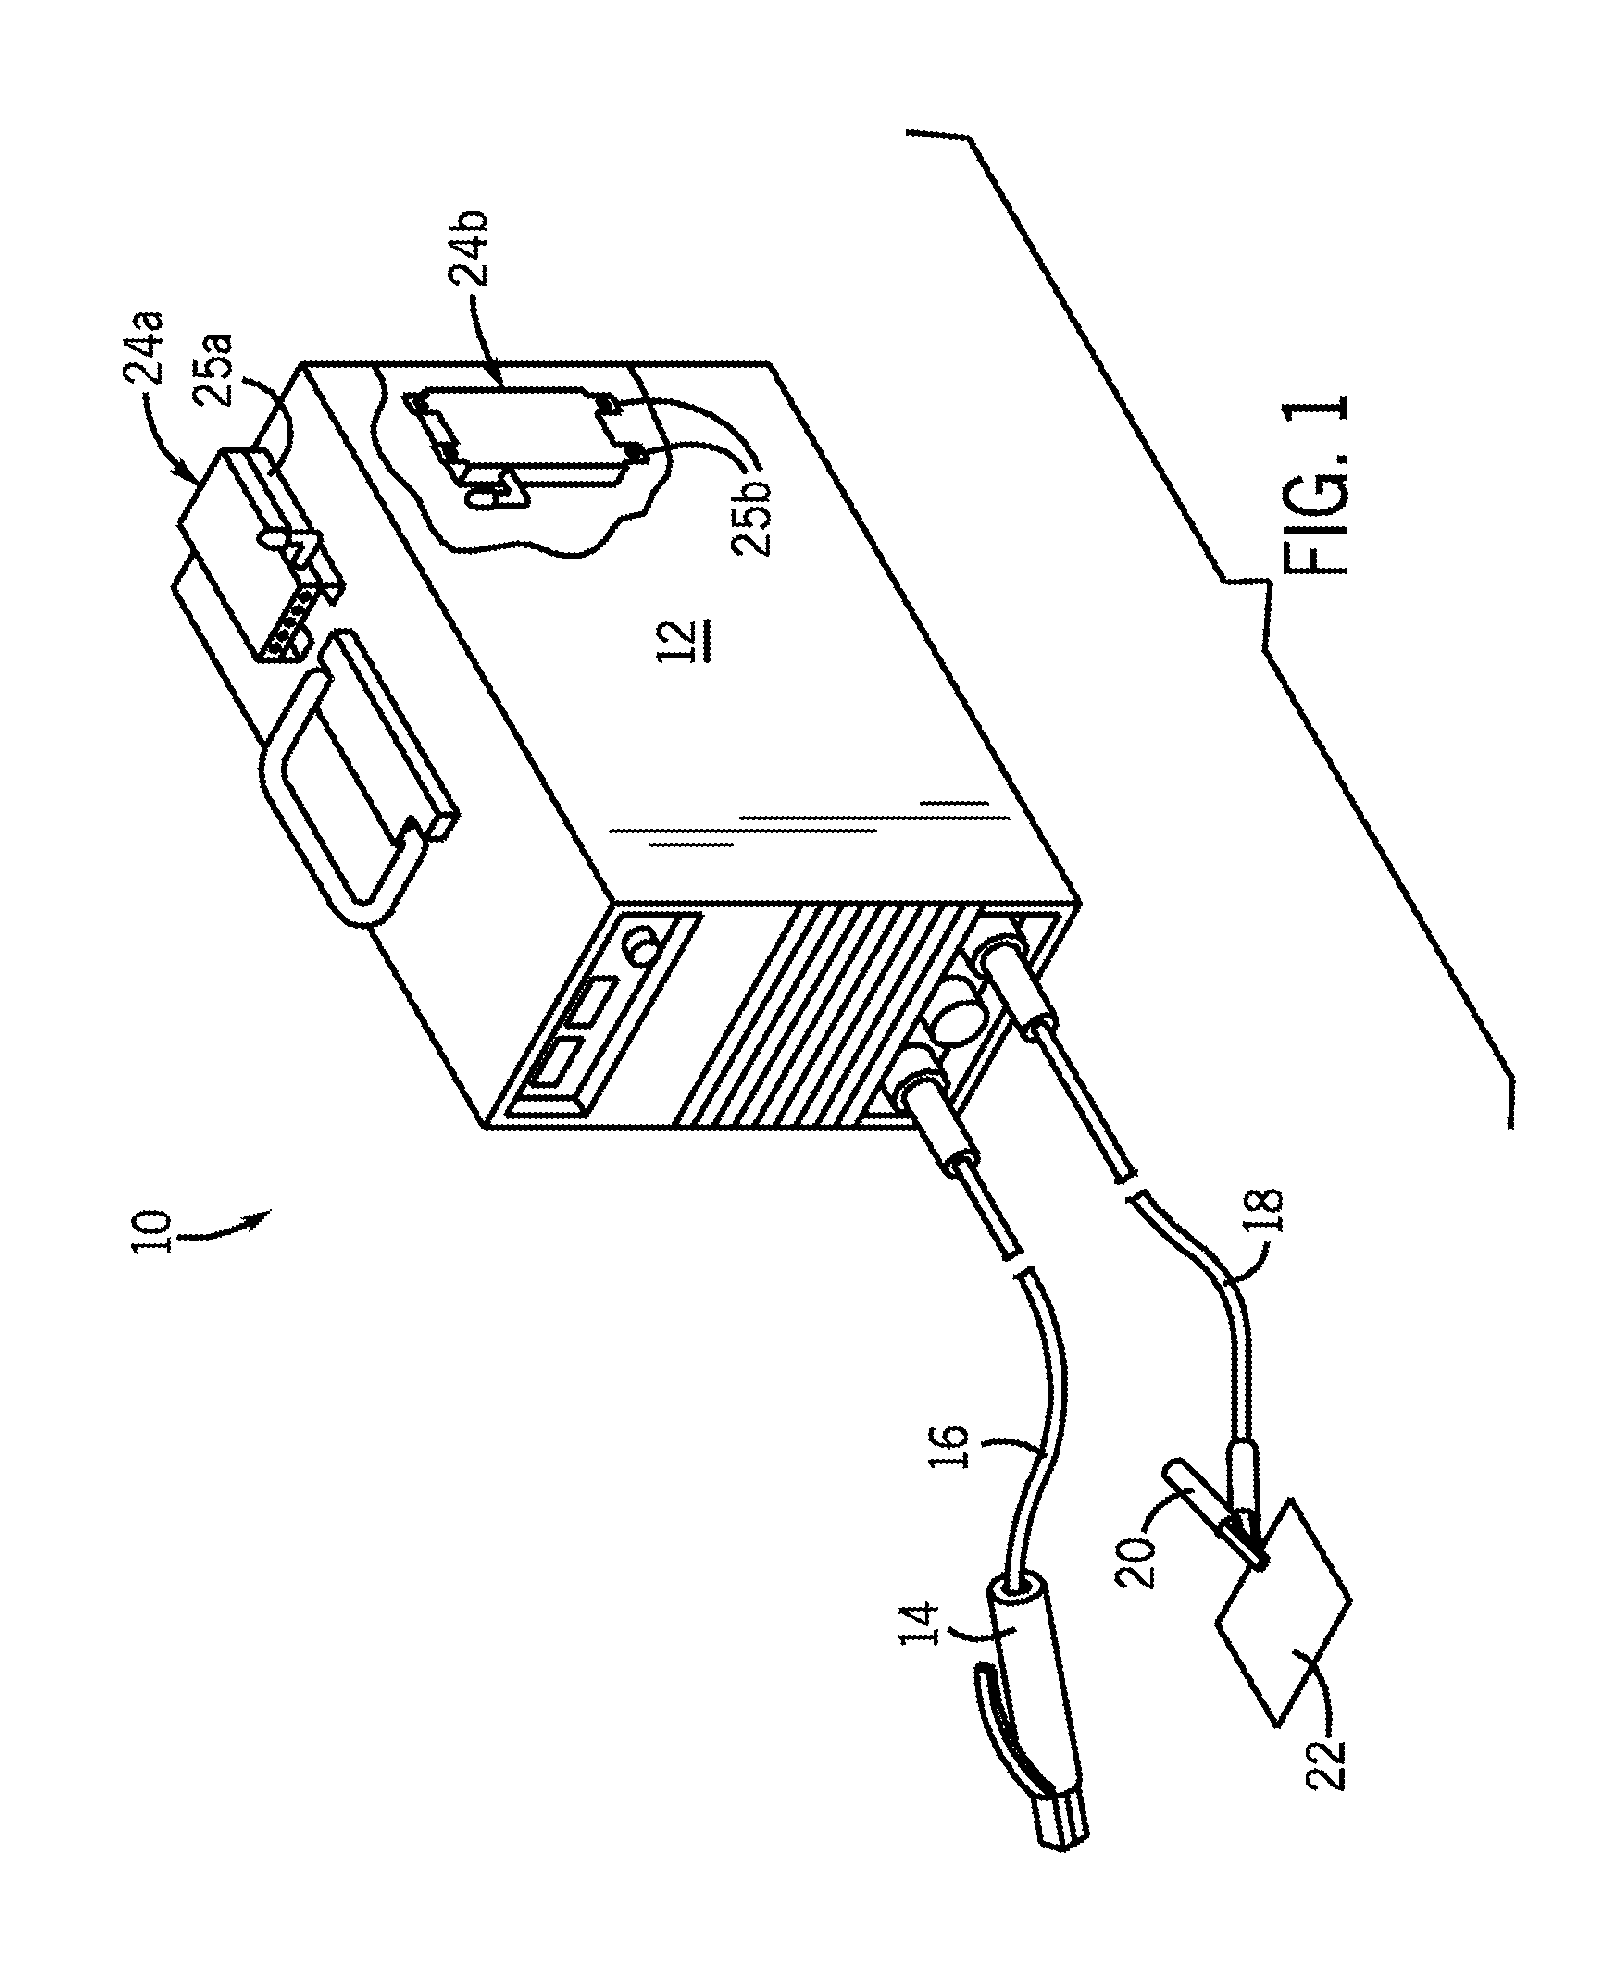 Wireless communication system for welding-type devices